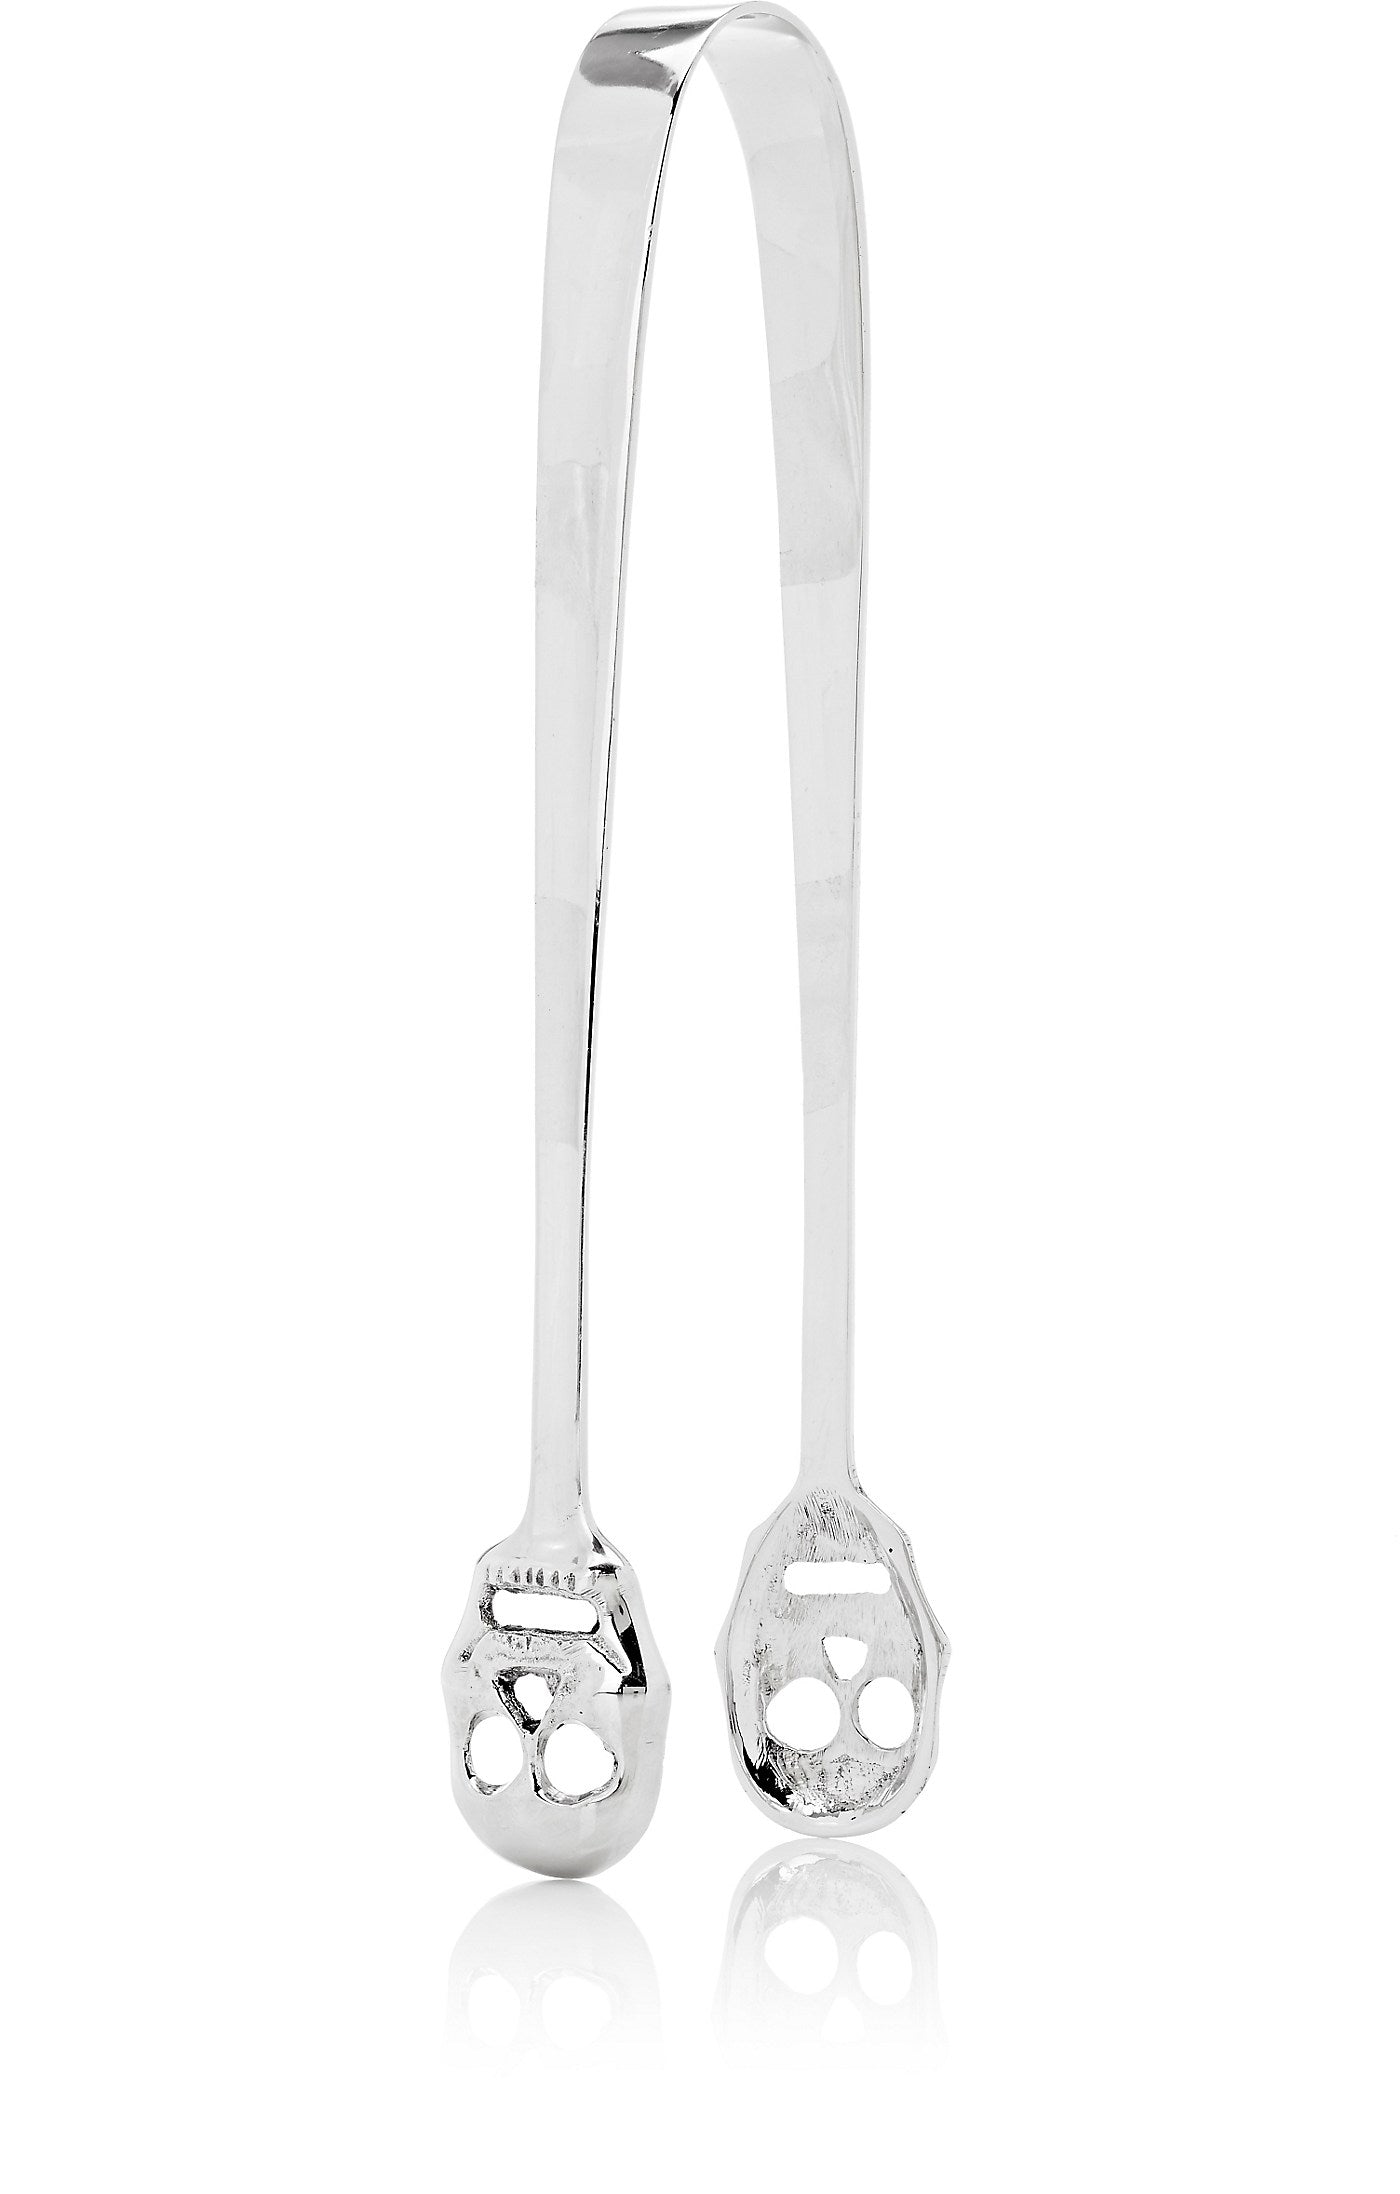 Sphere Ice Tongs - Stainless Tovolo 81-9165 Sphere Ice Tongs